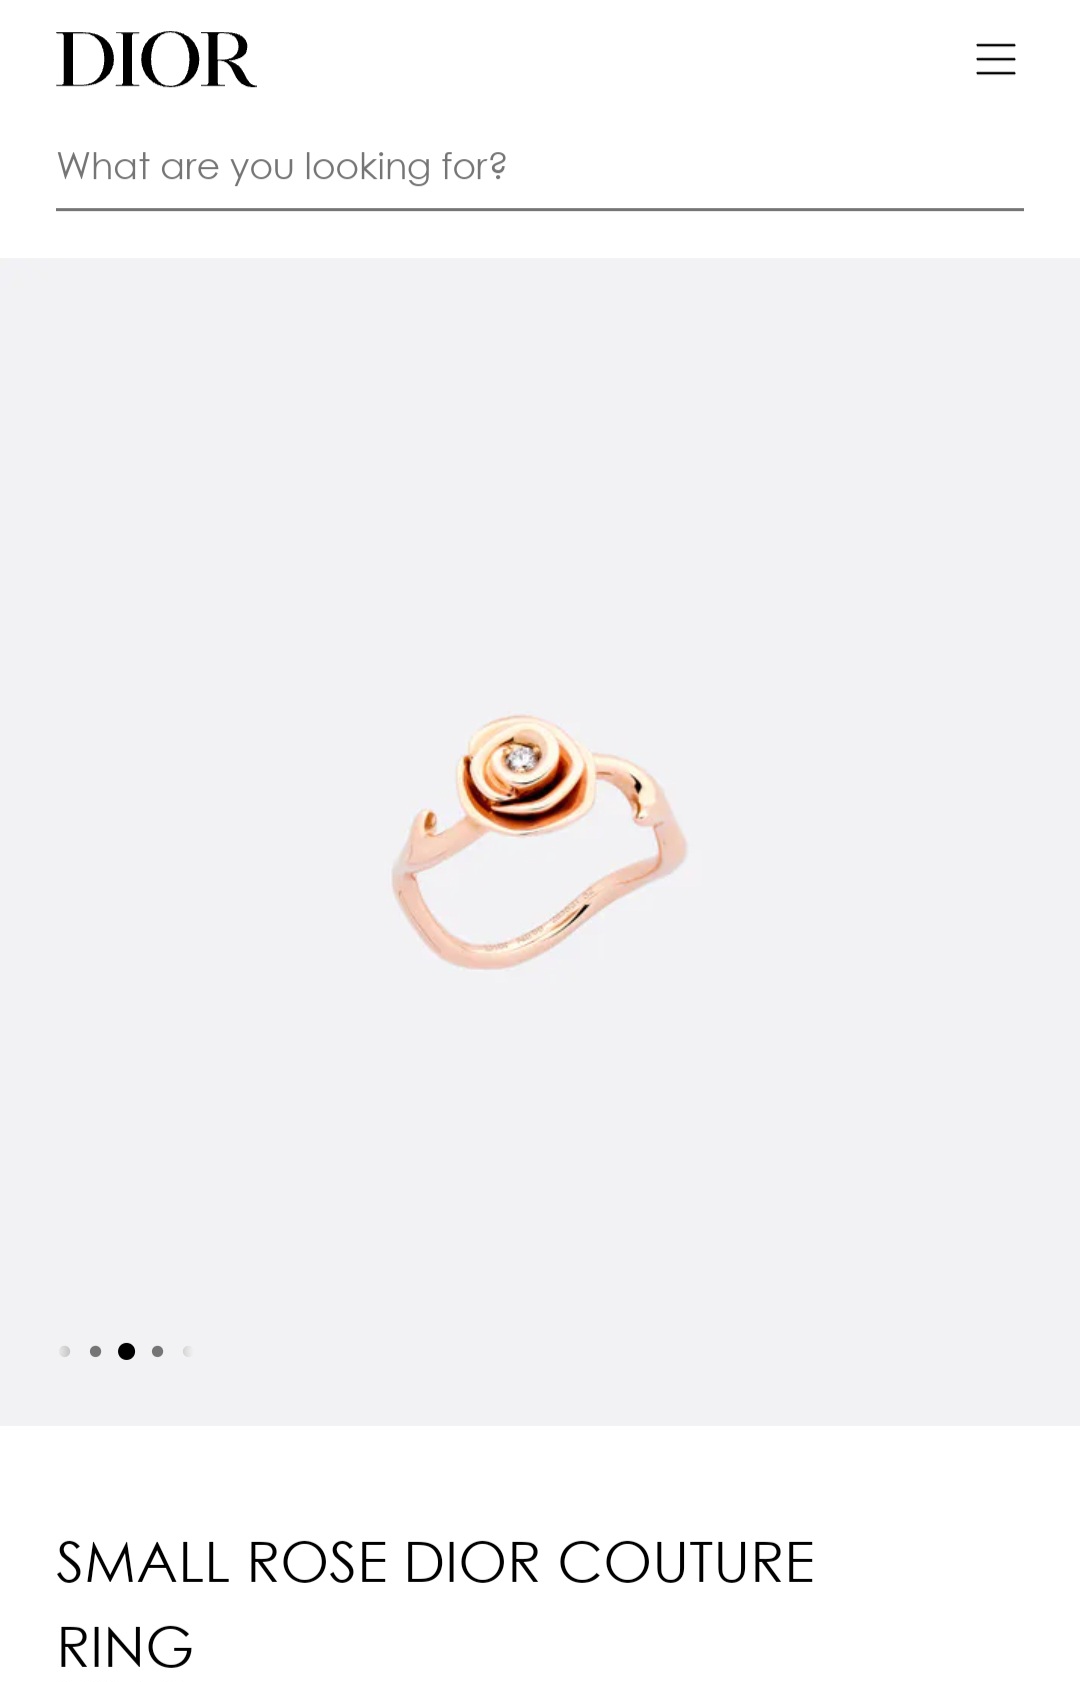 SMALL ROSE DIOR COUTURE RING